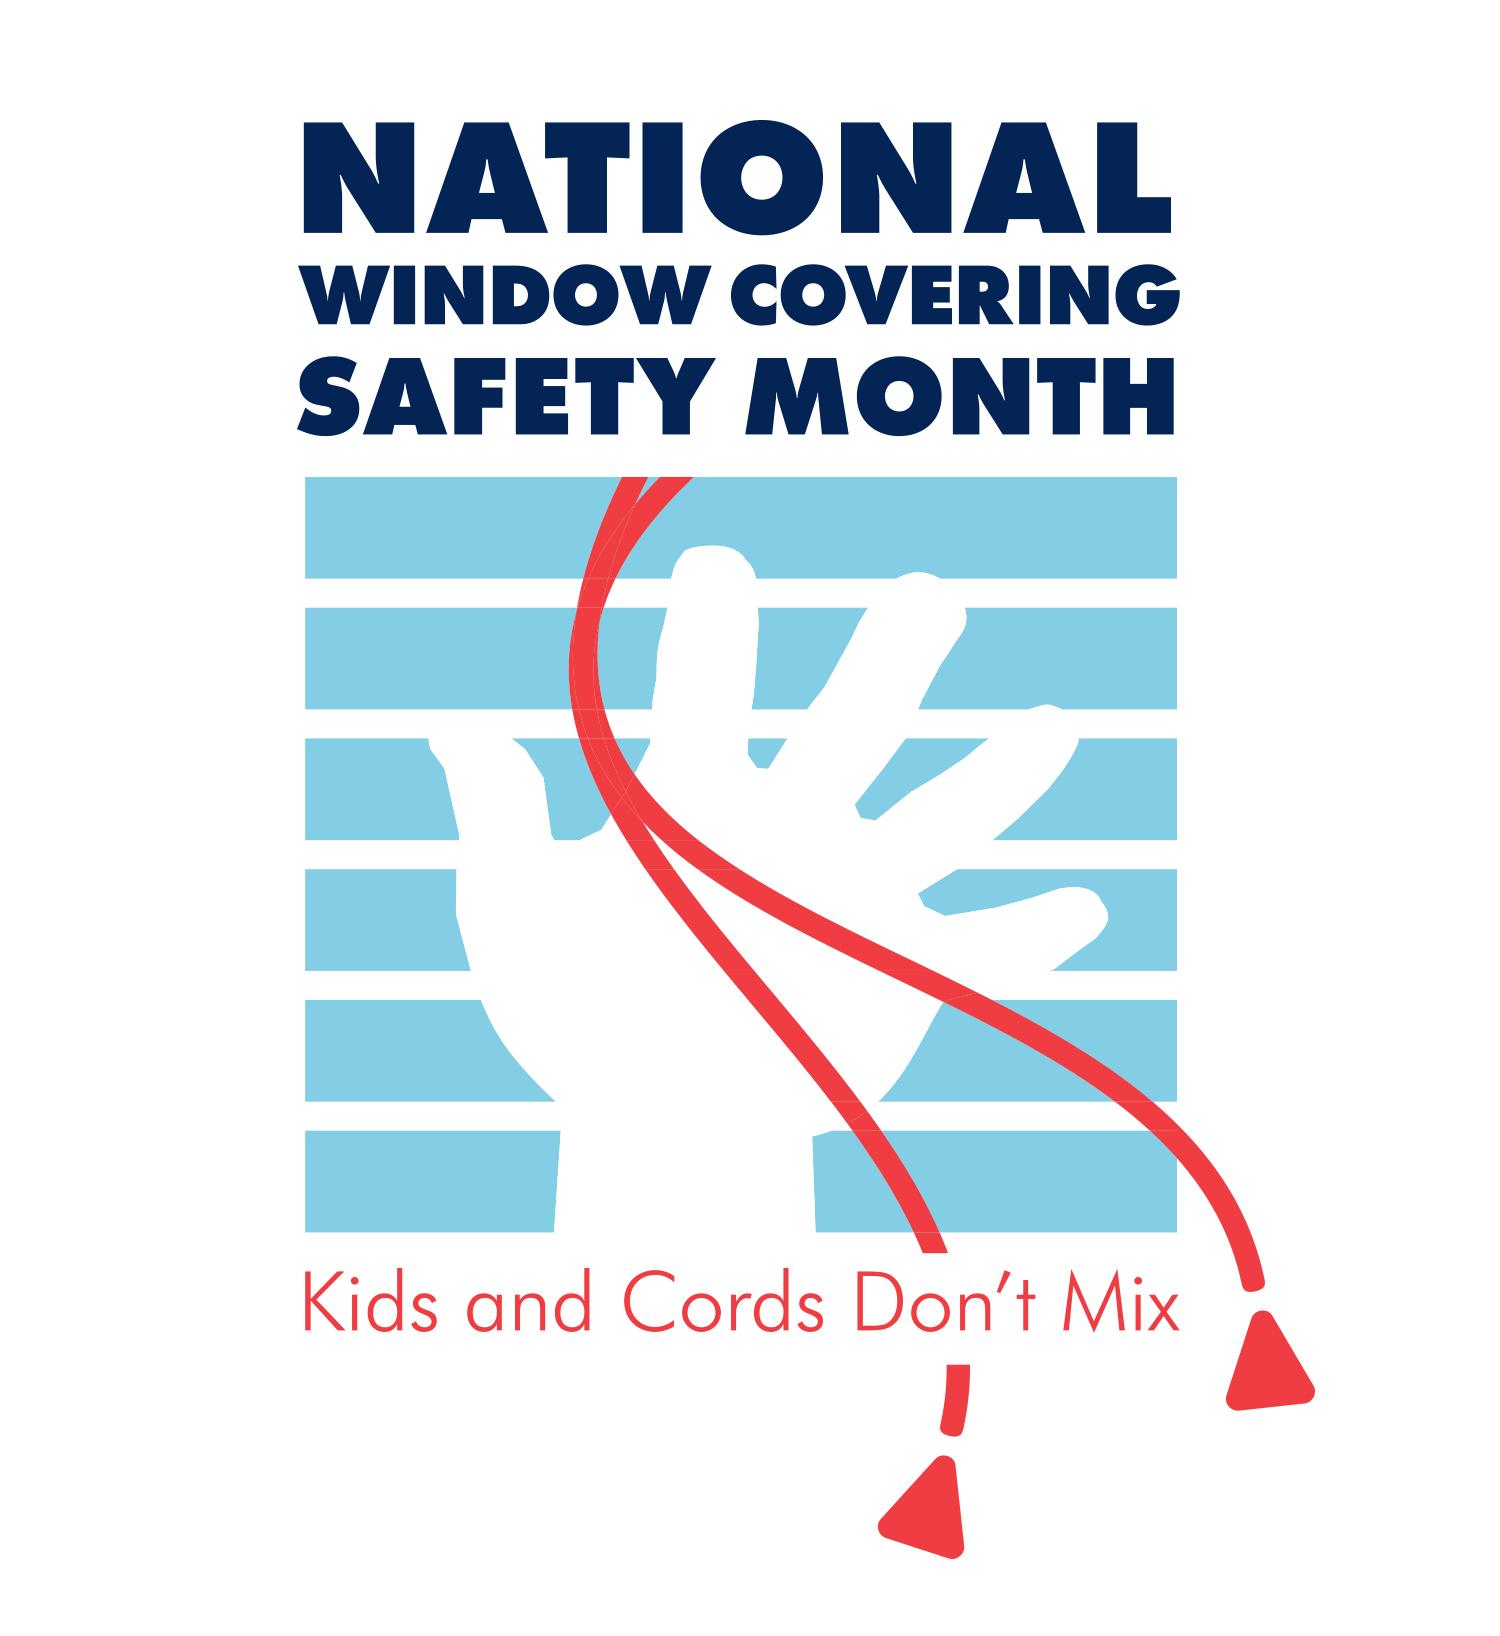 The logo for National Window covering safety month